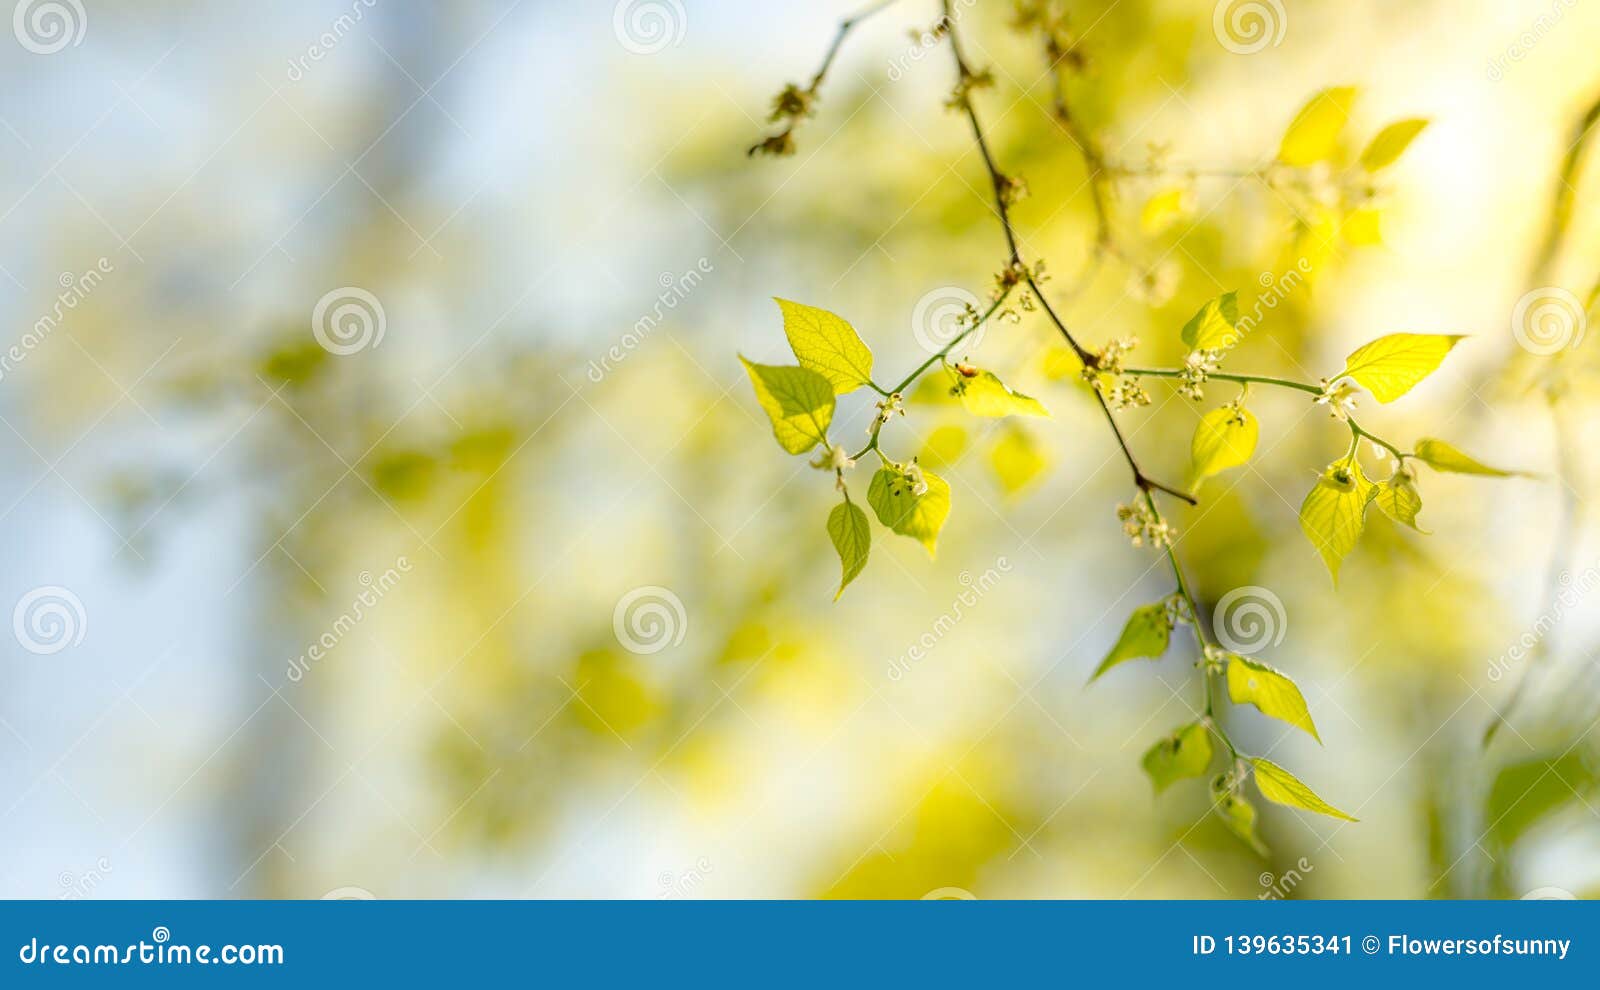 Fresh and Green Leaves. Nature Background, Freshness and New Life Nature  Concept Stock Image - Image of branch, freshness: 139635341